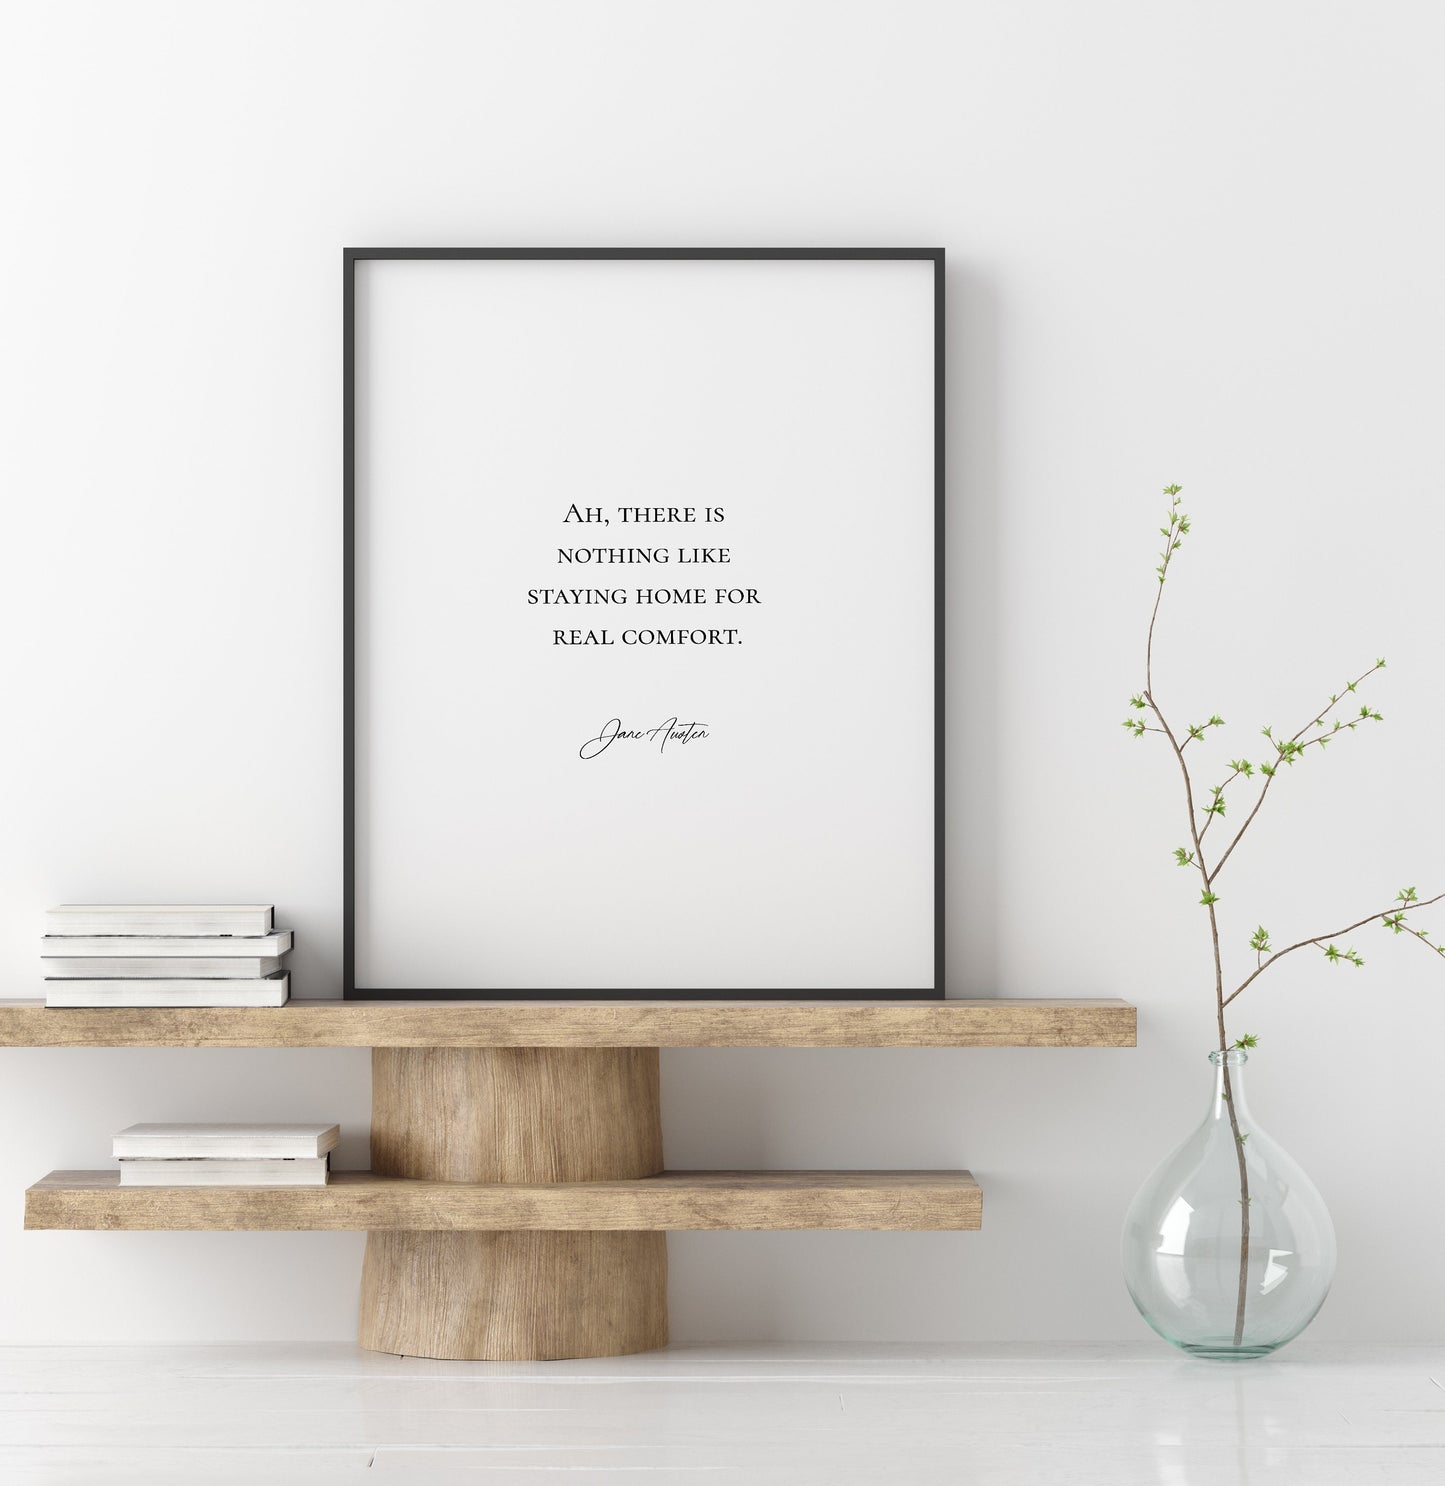 Ah there is nothing like staying home for real comfort,Jane Austen quote,New home gift,Housewarming gift,Book lover gift,Home decor,Literary